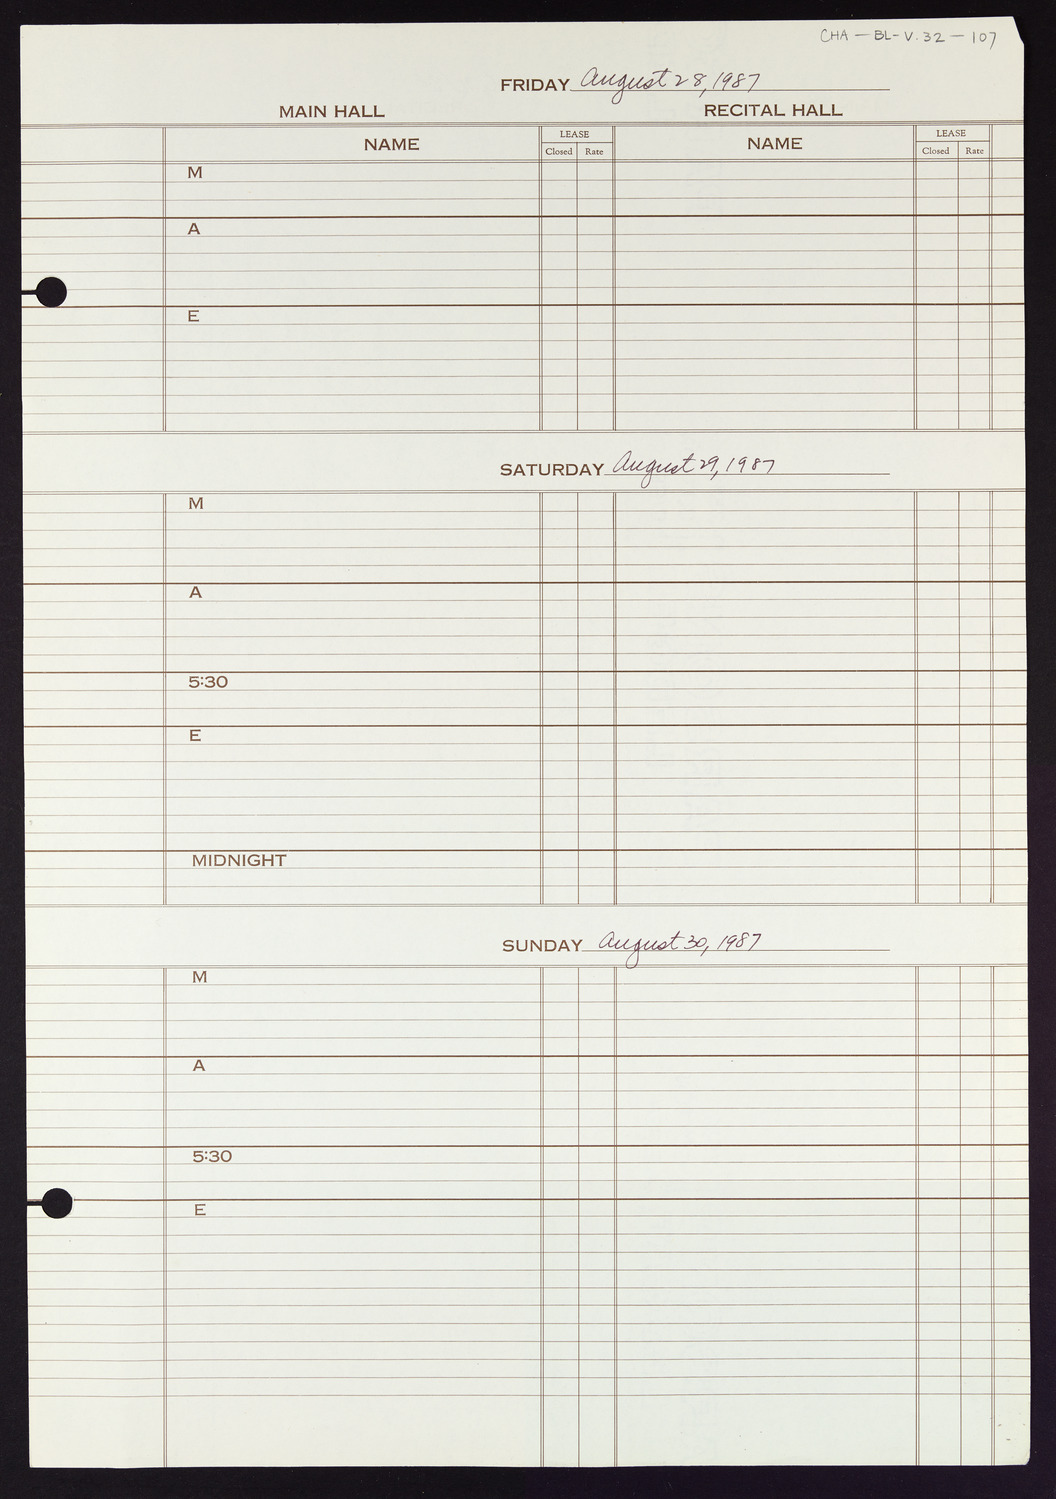 Carnegie Hall Booking Ledger, volume 32, page 107